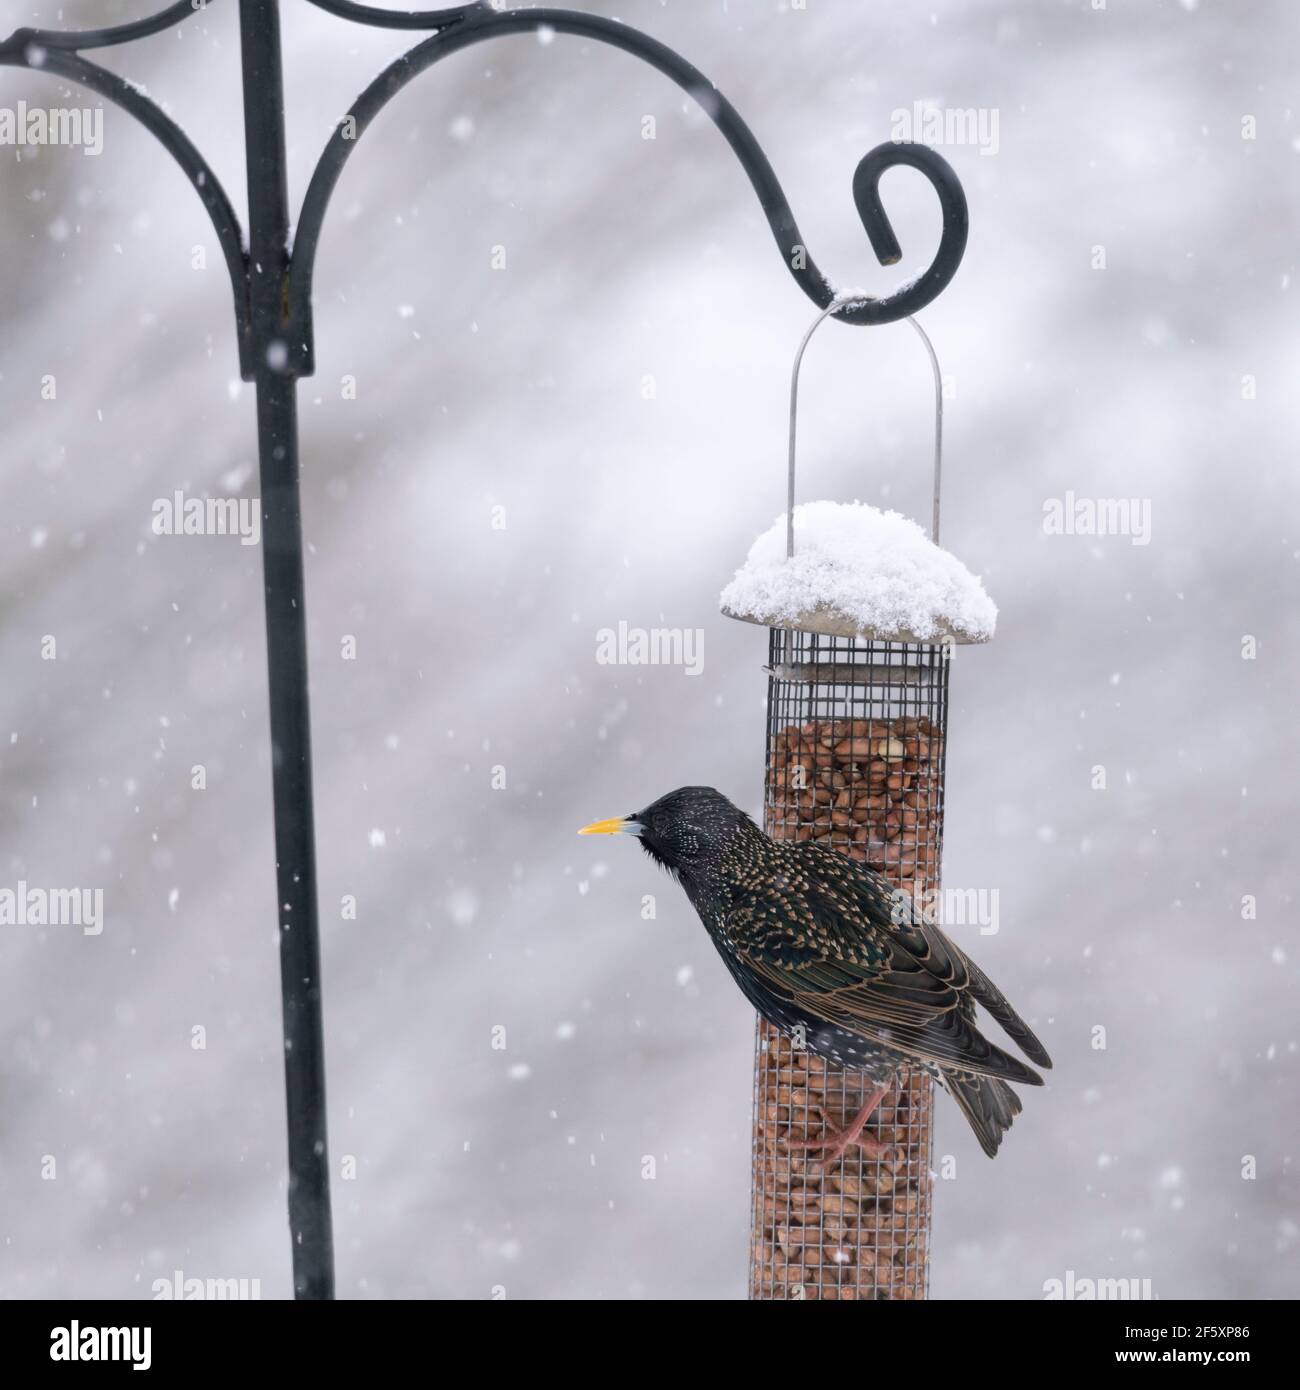 A Starling (Sturnus Vulgaris) Clinging to a Garden Bird Feeder Full of Peanuts During a Snow Shower Stock Photo